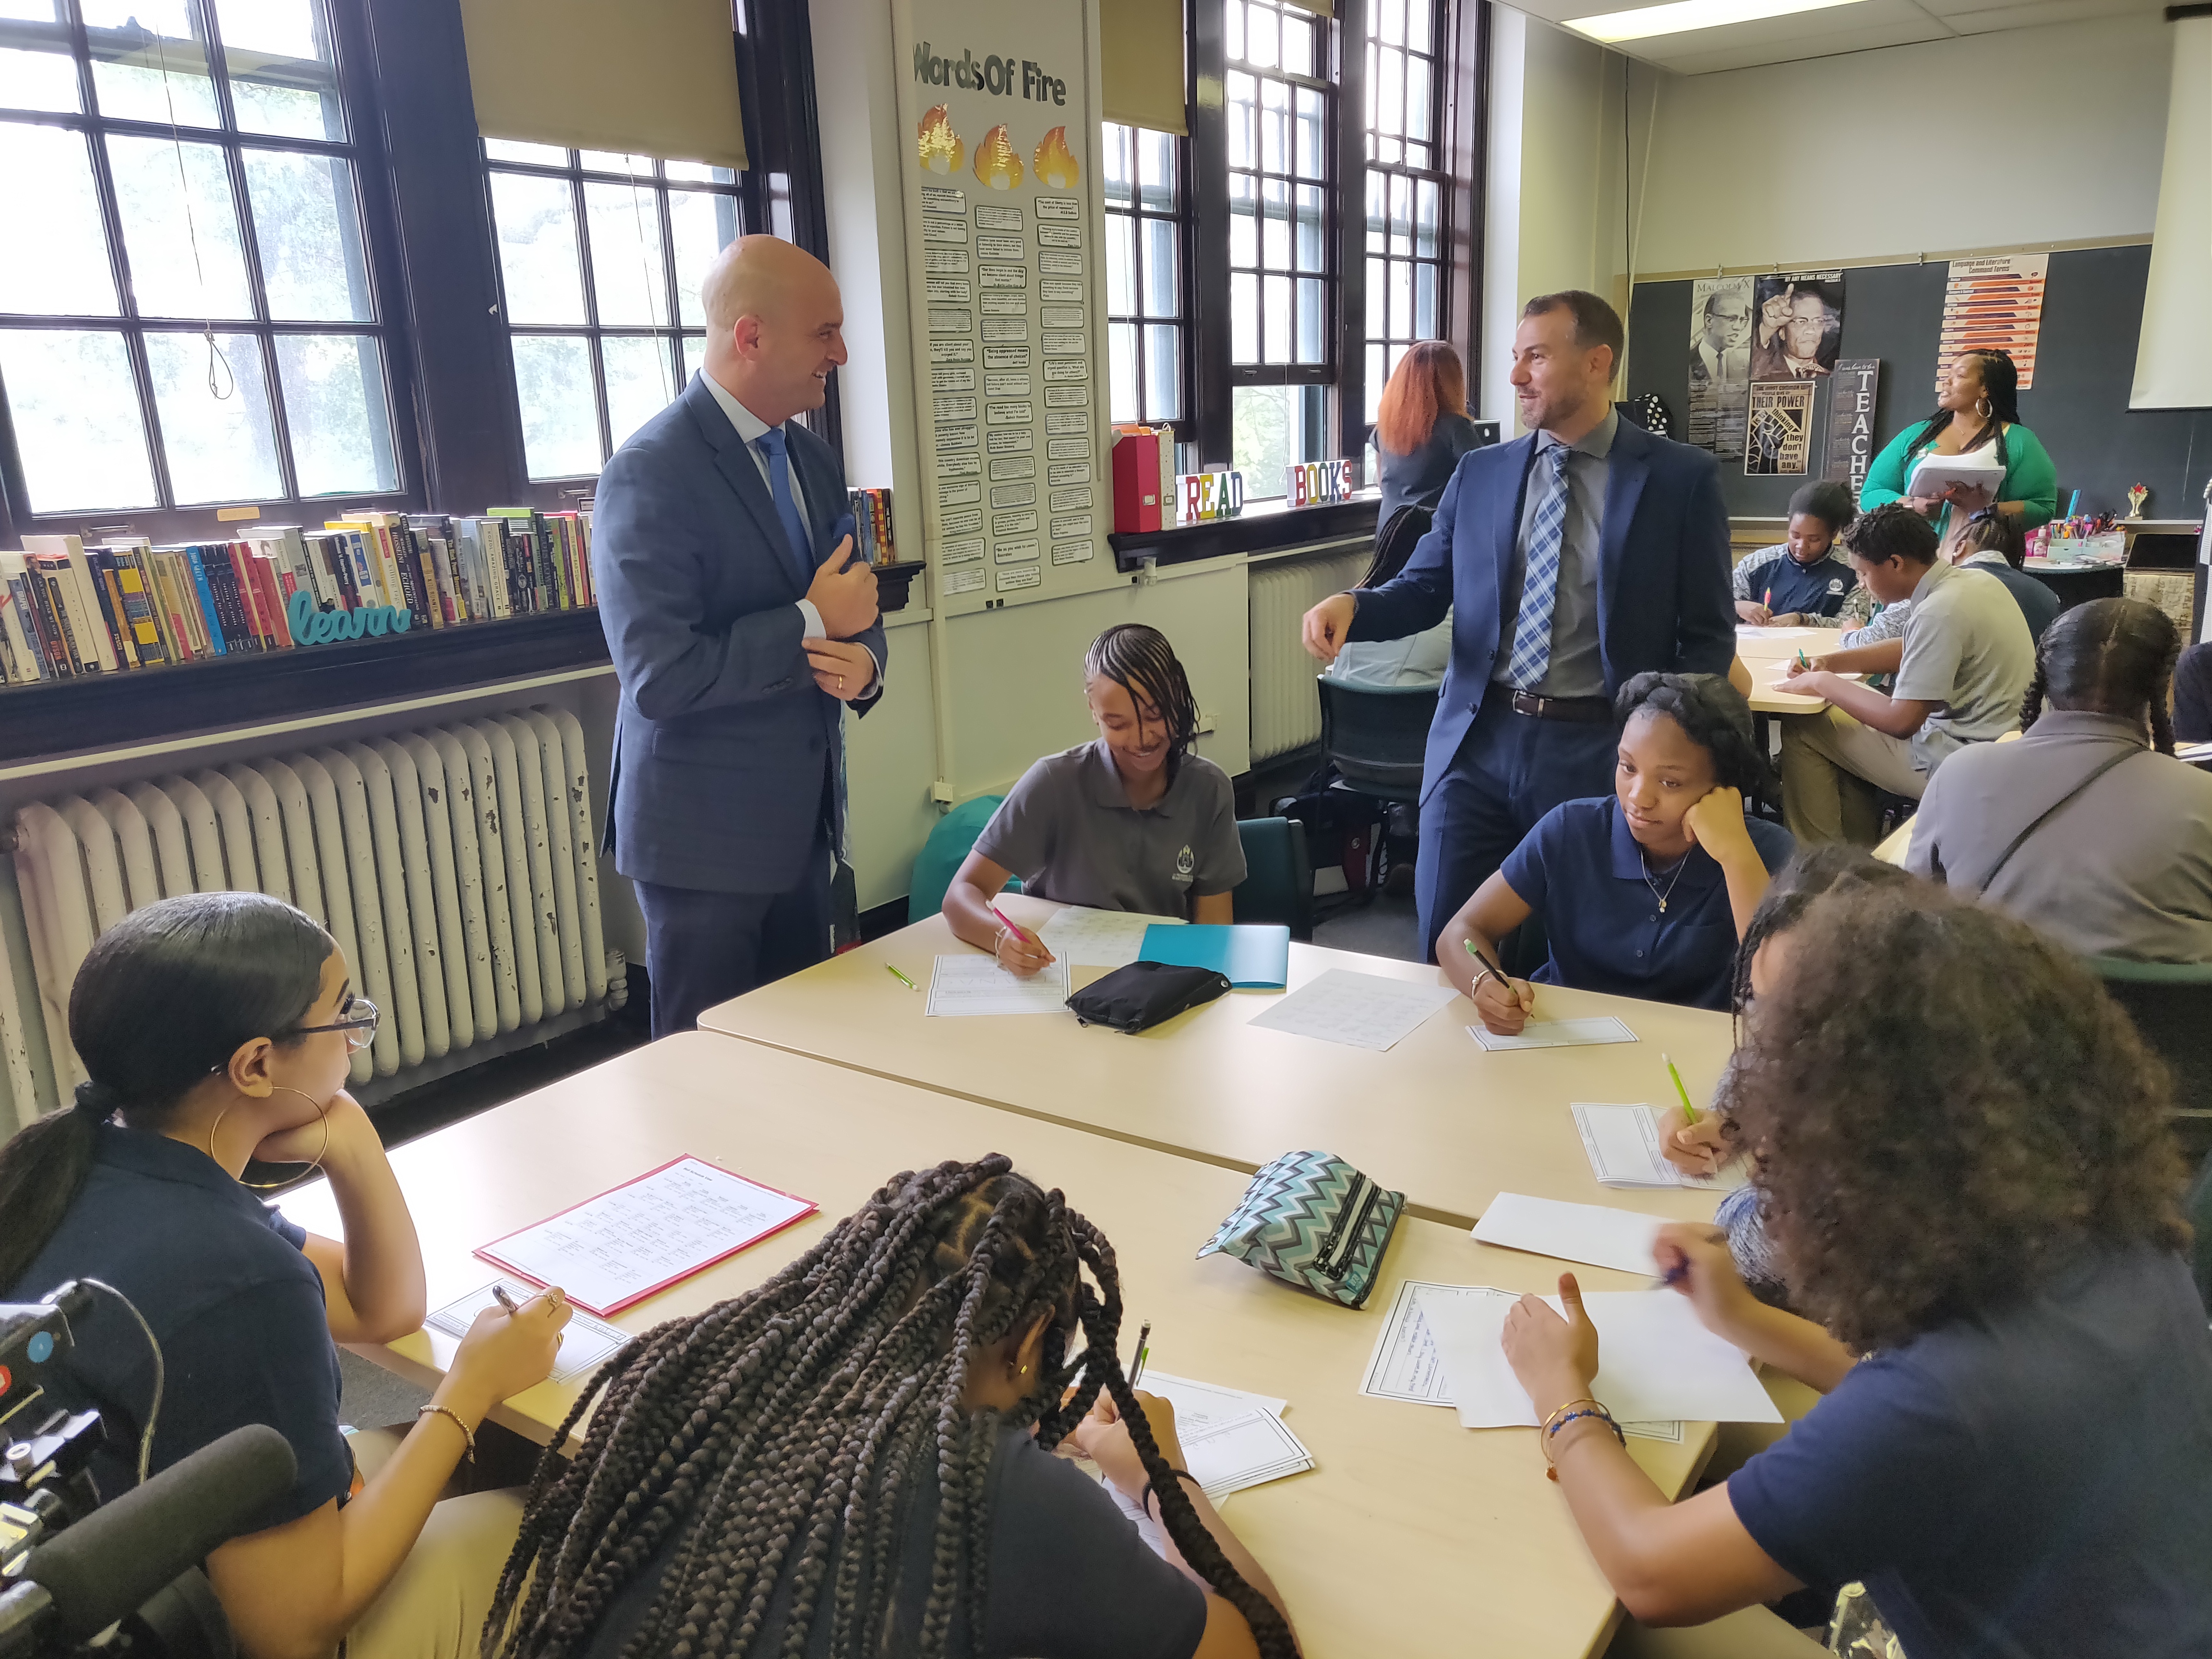 Nir Saar, right, and Superintendent Nikolai Vitti on the first day of classes at the School at Marygrove, the ambitious new school Saar helped found. He has been placed on administrative leave.